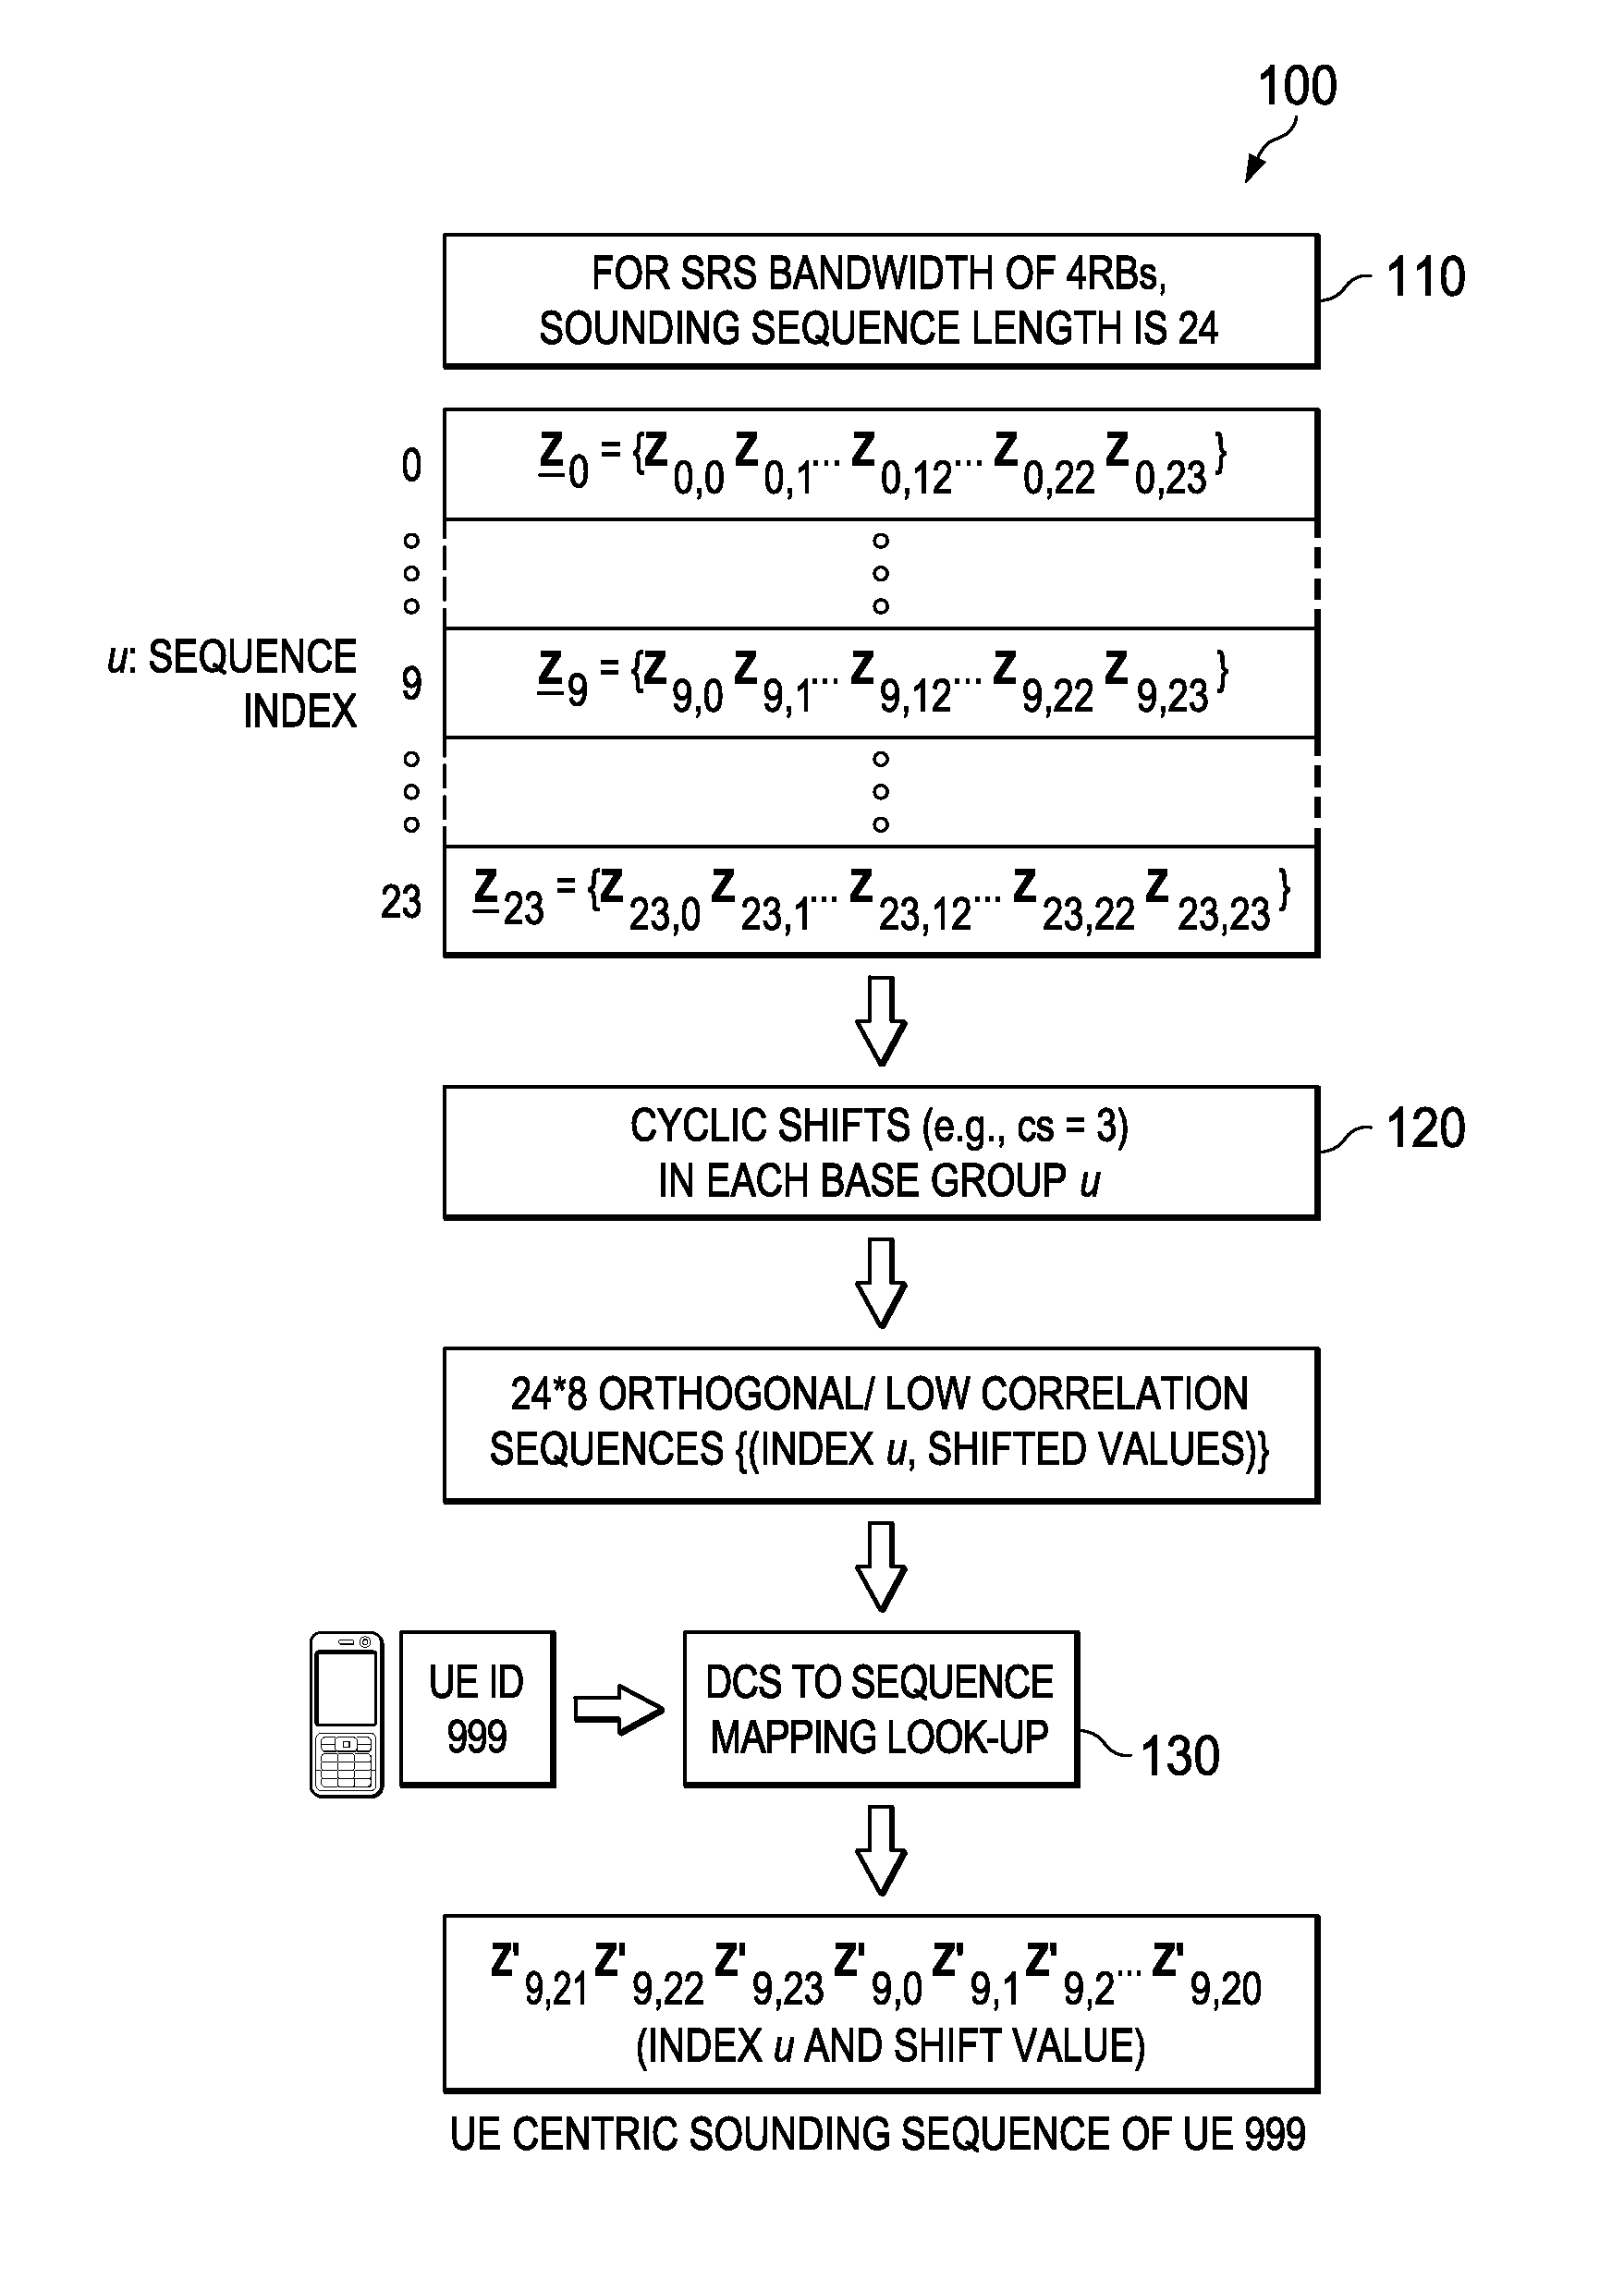 System and Method for Network Uplink Measurement Based Operation Using UE Centric Sounding